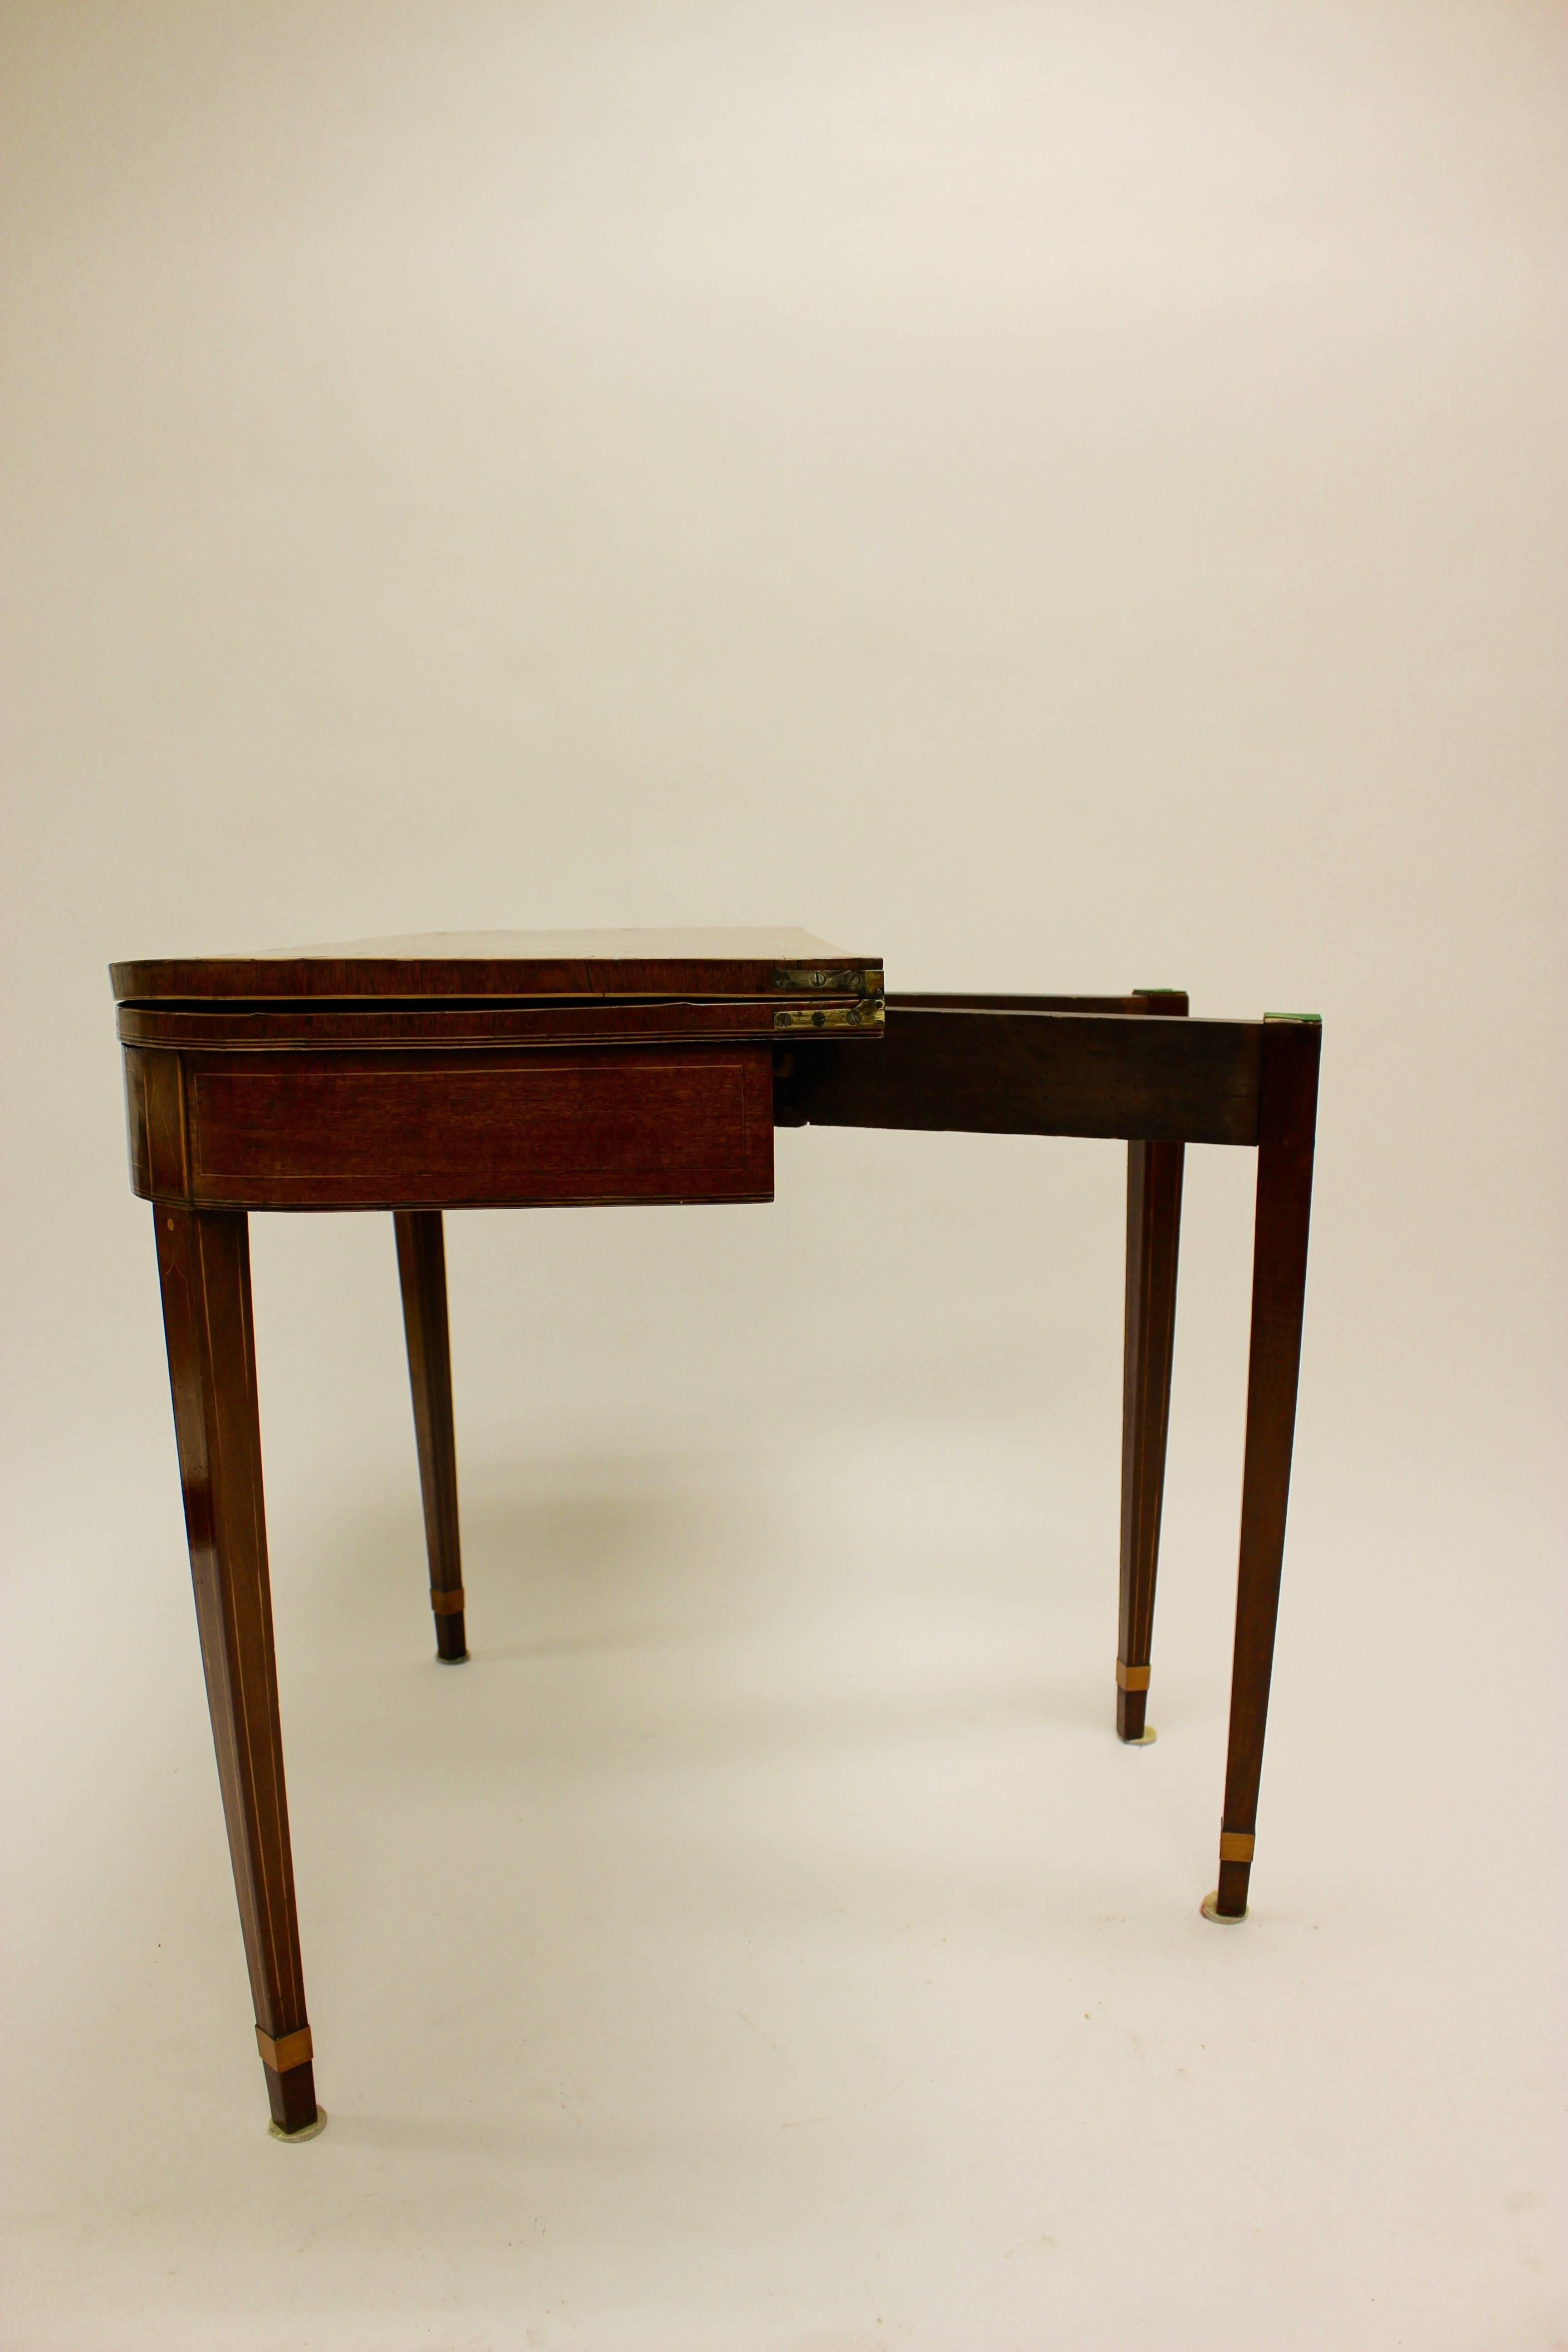 A George III inlaid light-toned mahogany and satinwood card table in the manner of Mayhew and Ince. The D-form cross banded fold-over top opens to reveal a later baize lined playing surface, above a breakfront frieze decorated with cross-banded